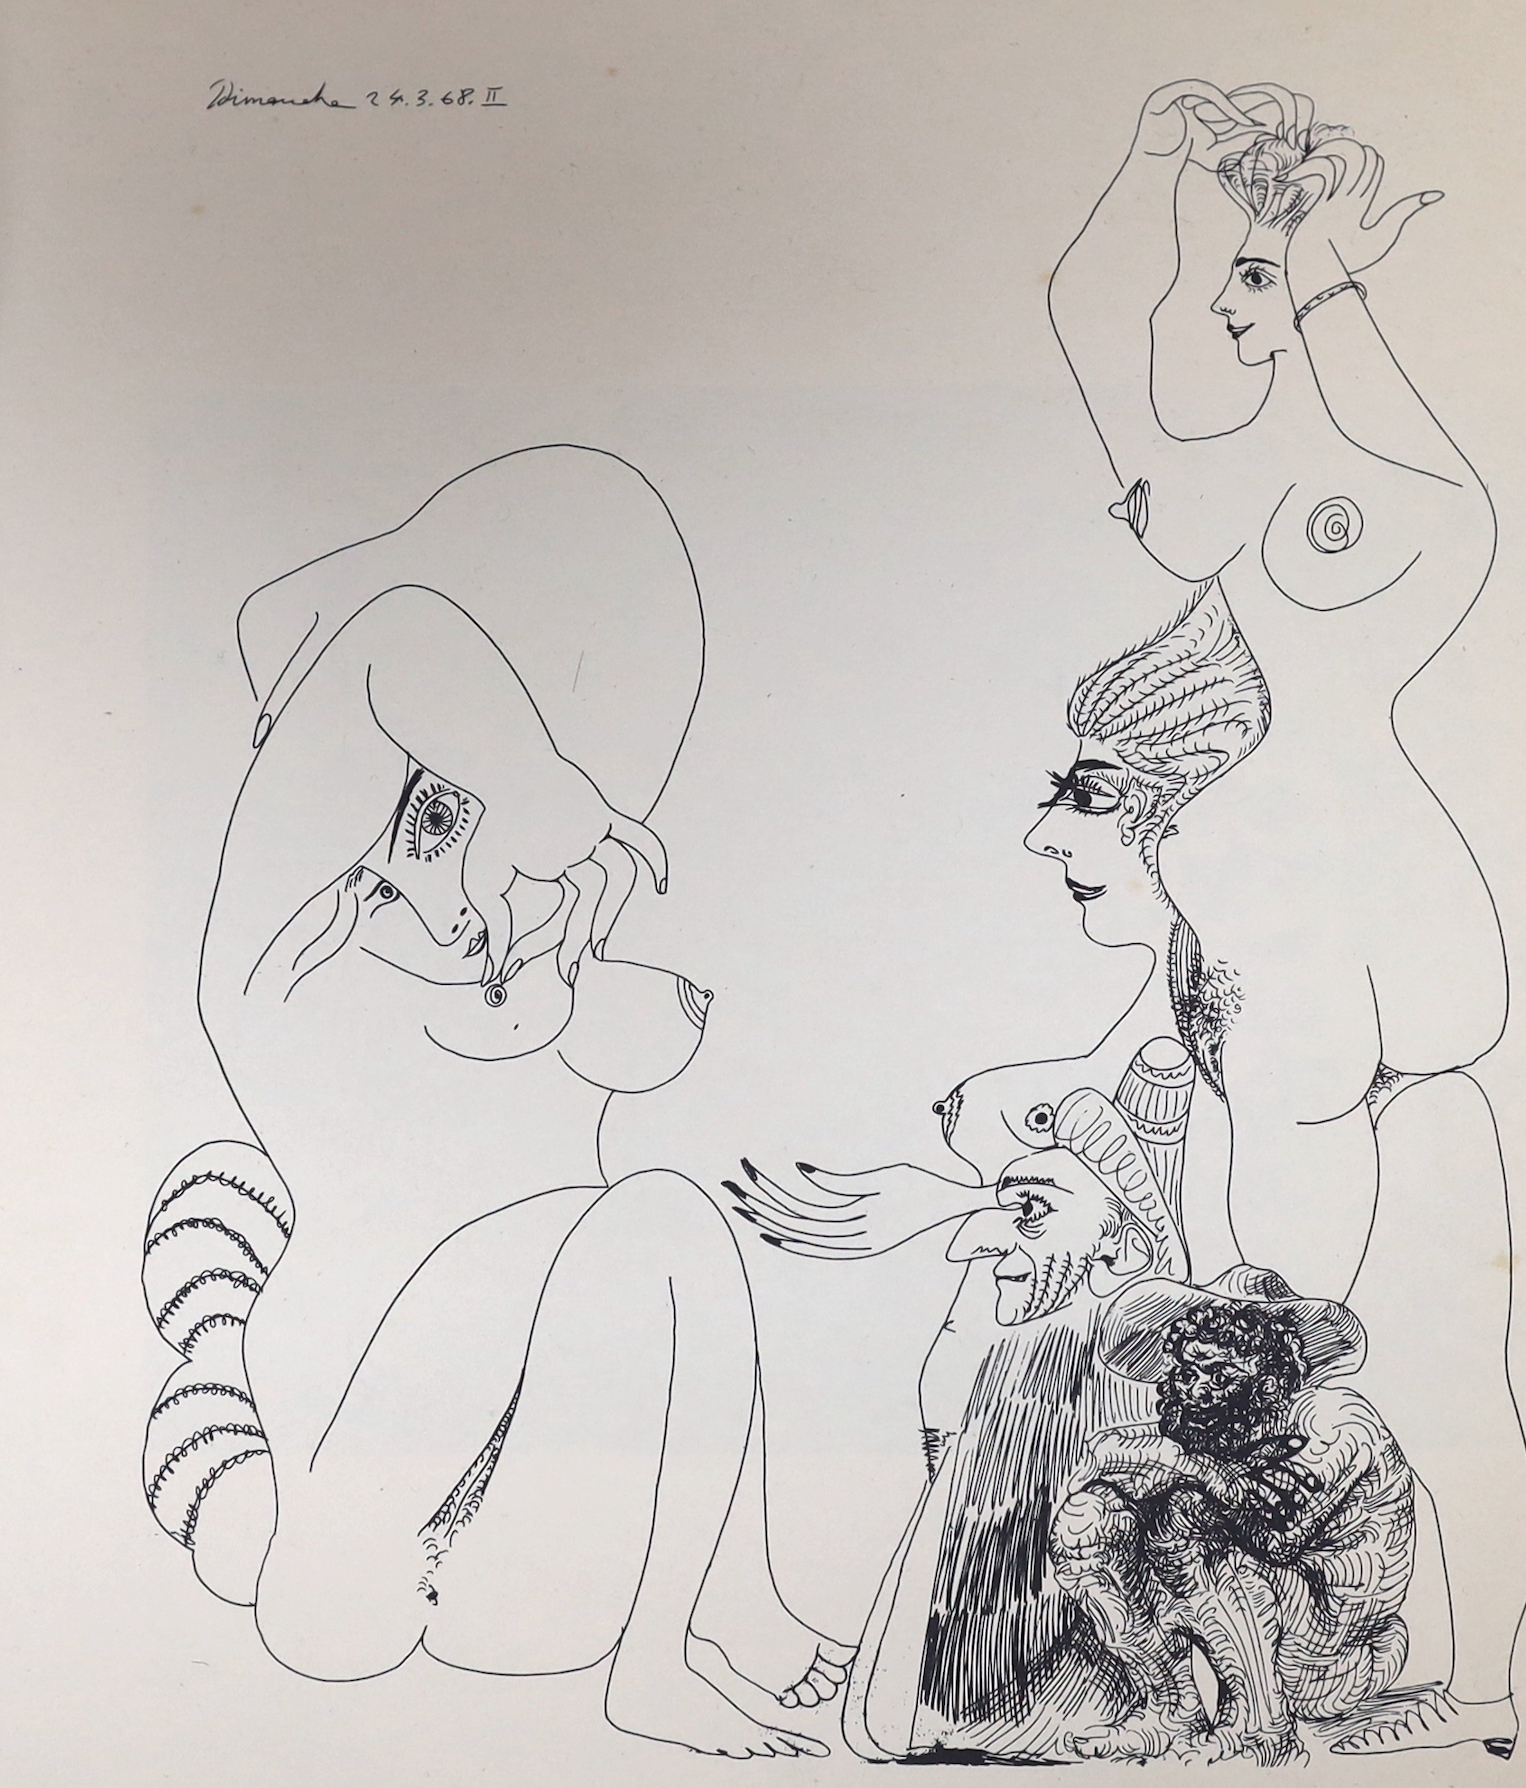 After Pablo Picasso (Spanish, 1881-1973), two erotic prints from Avant Garde Magazine, America, largest 26 x 22cm, unframed